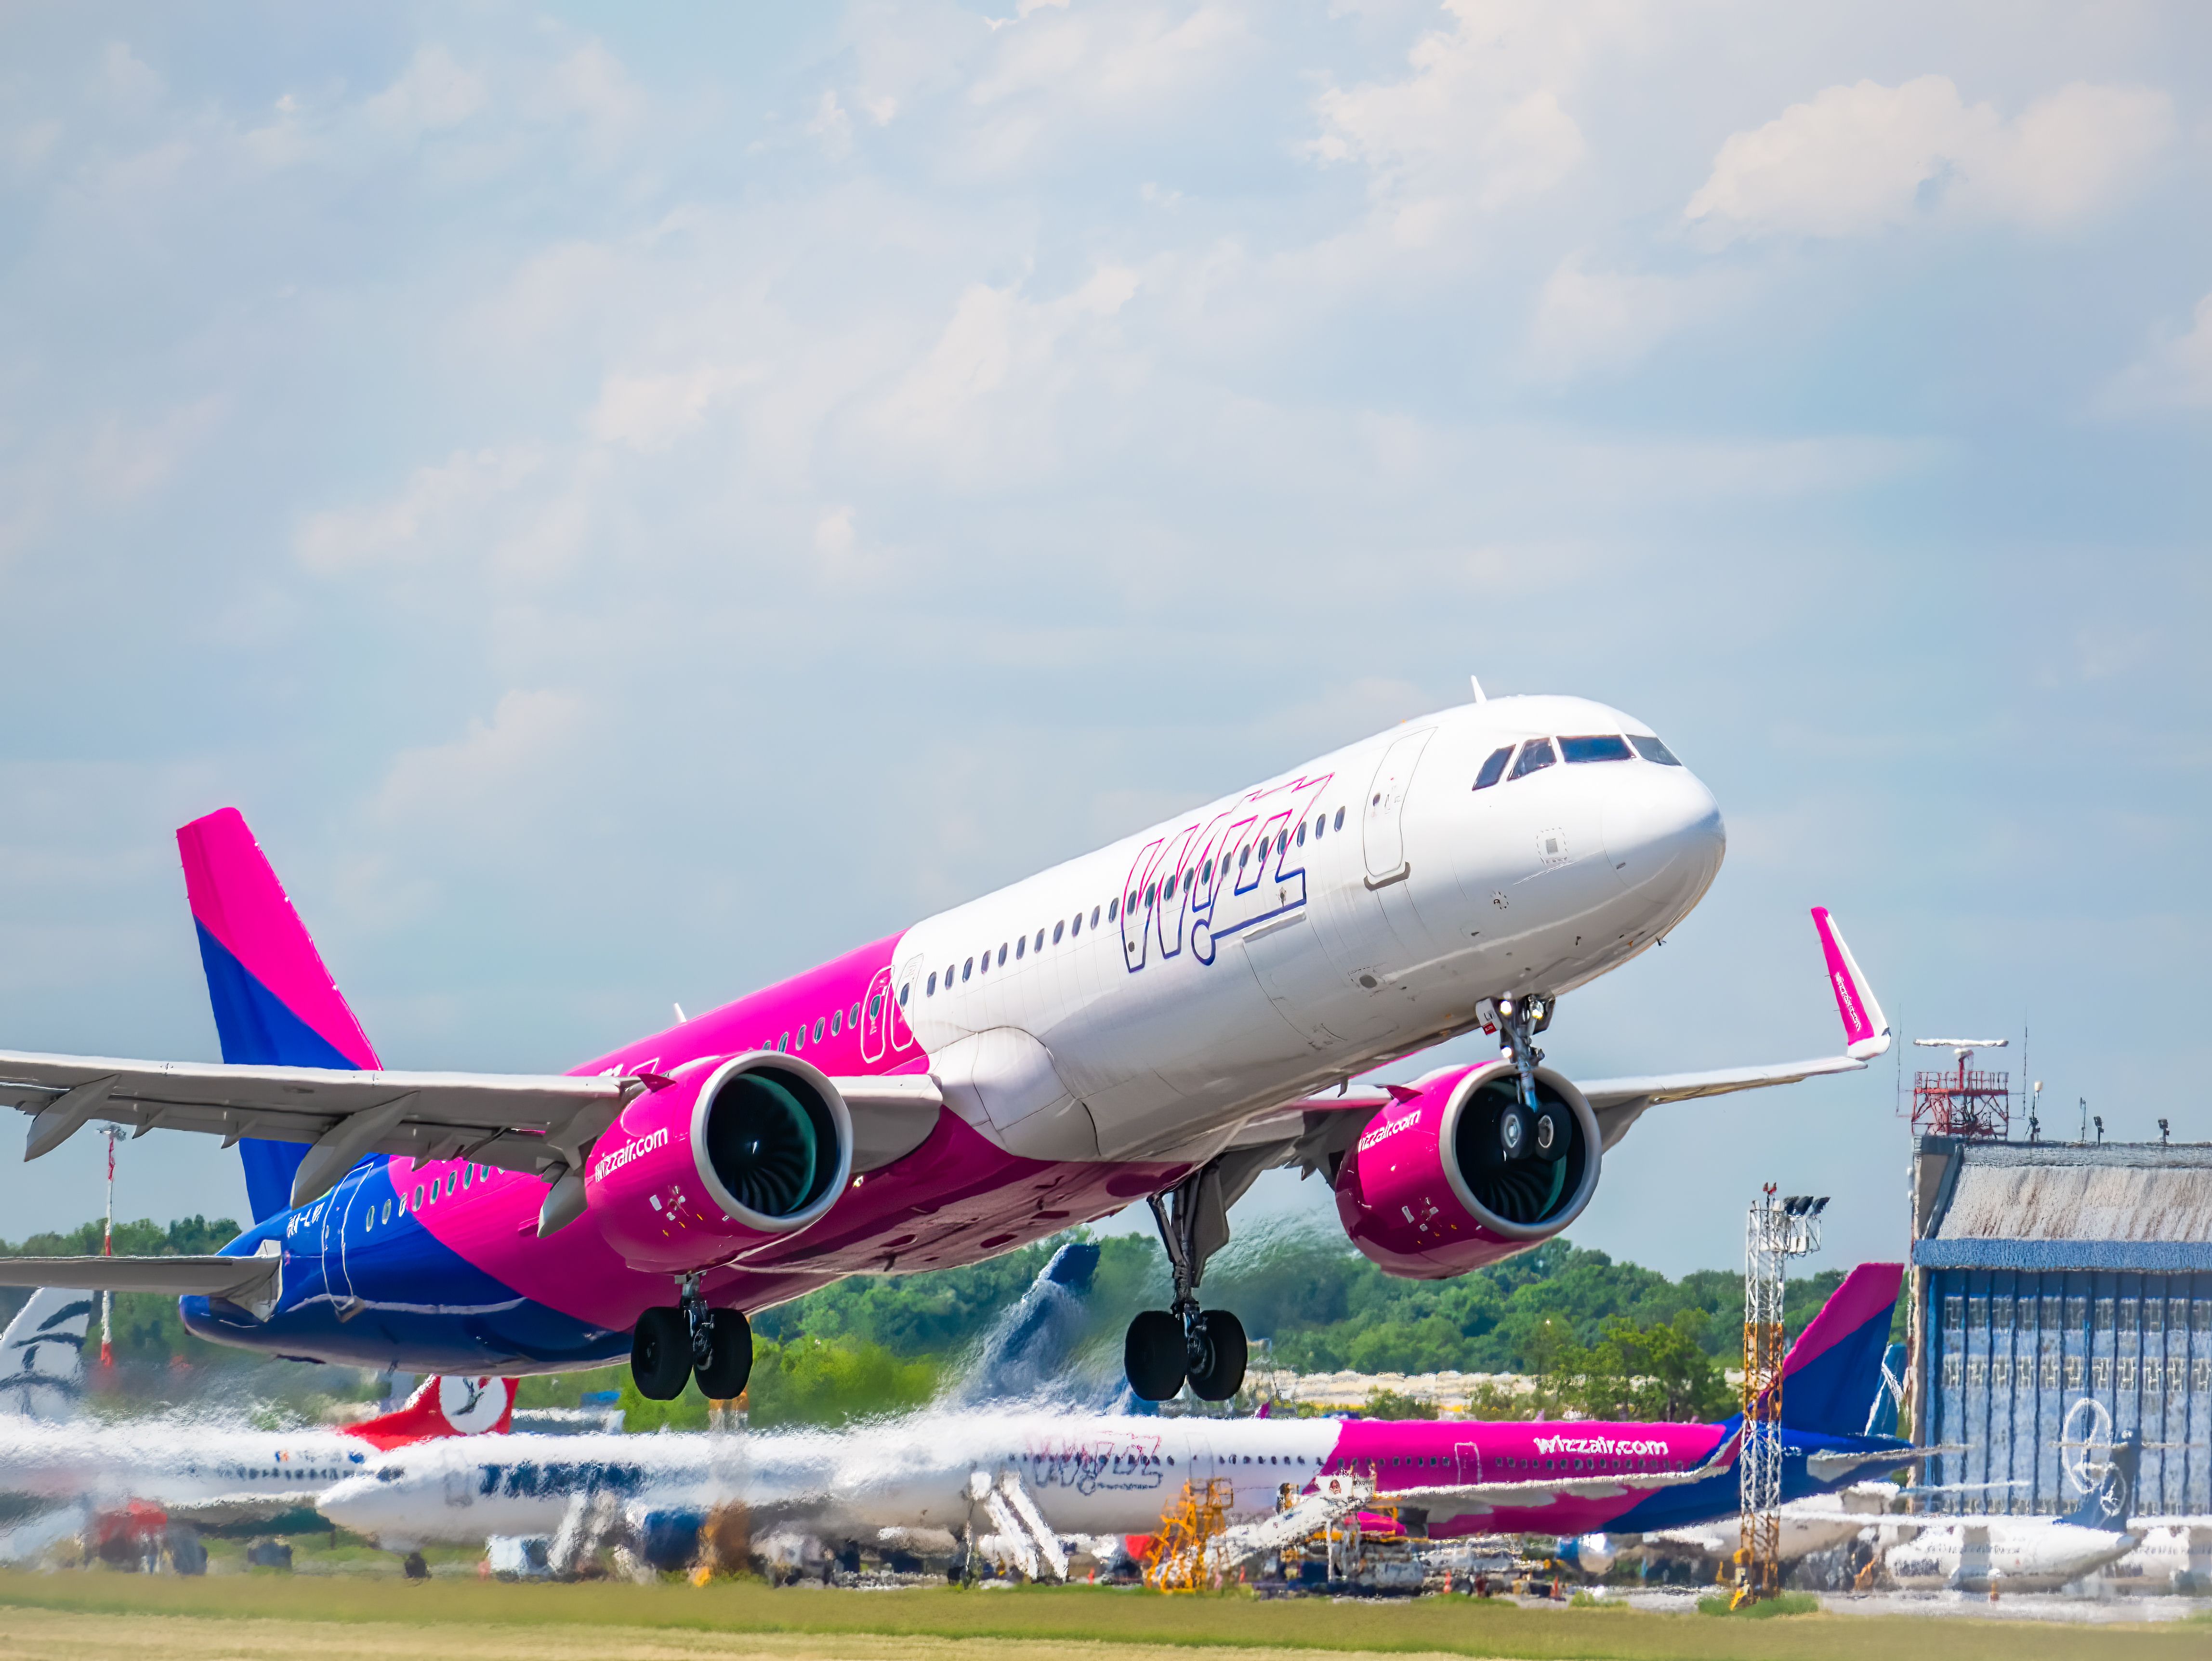 Wizz Air A320 taking off